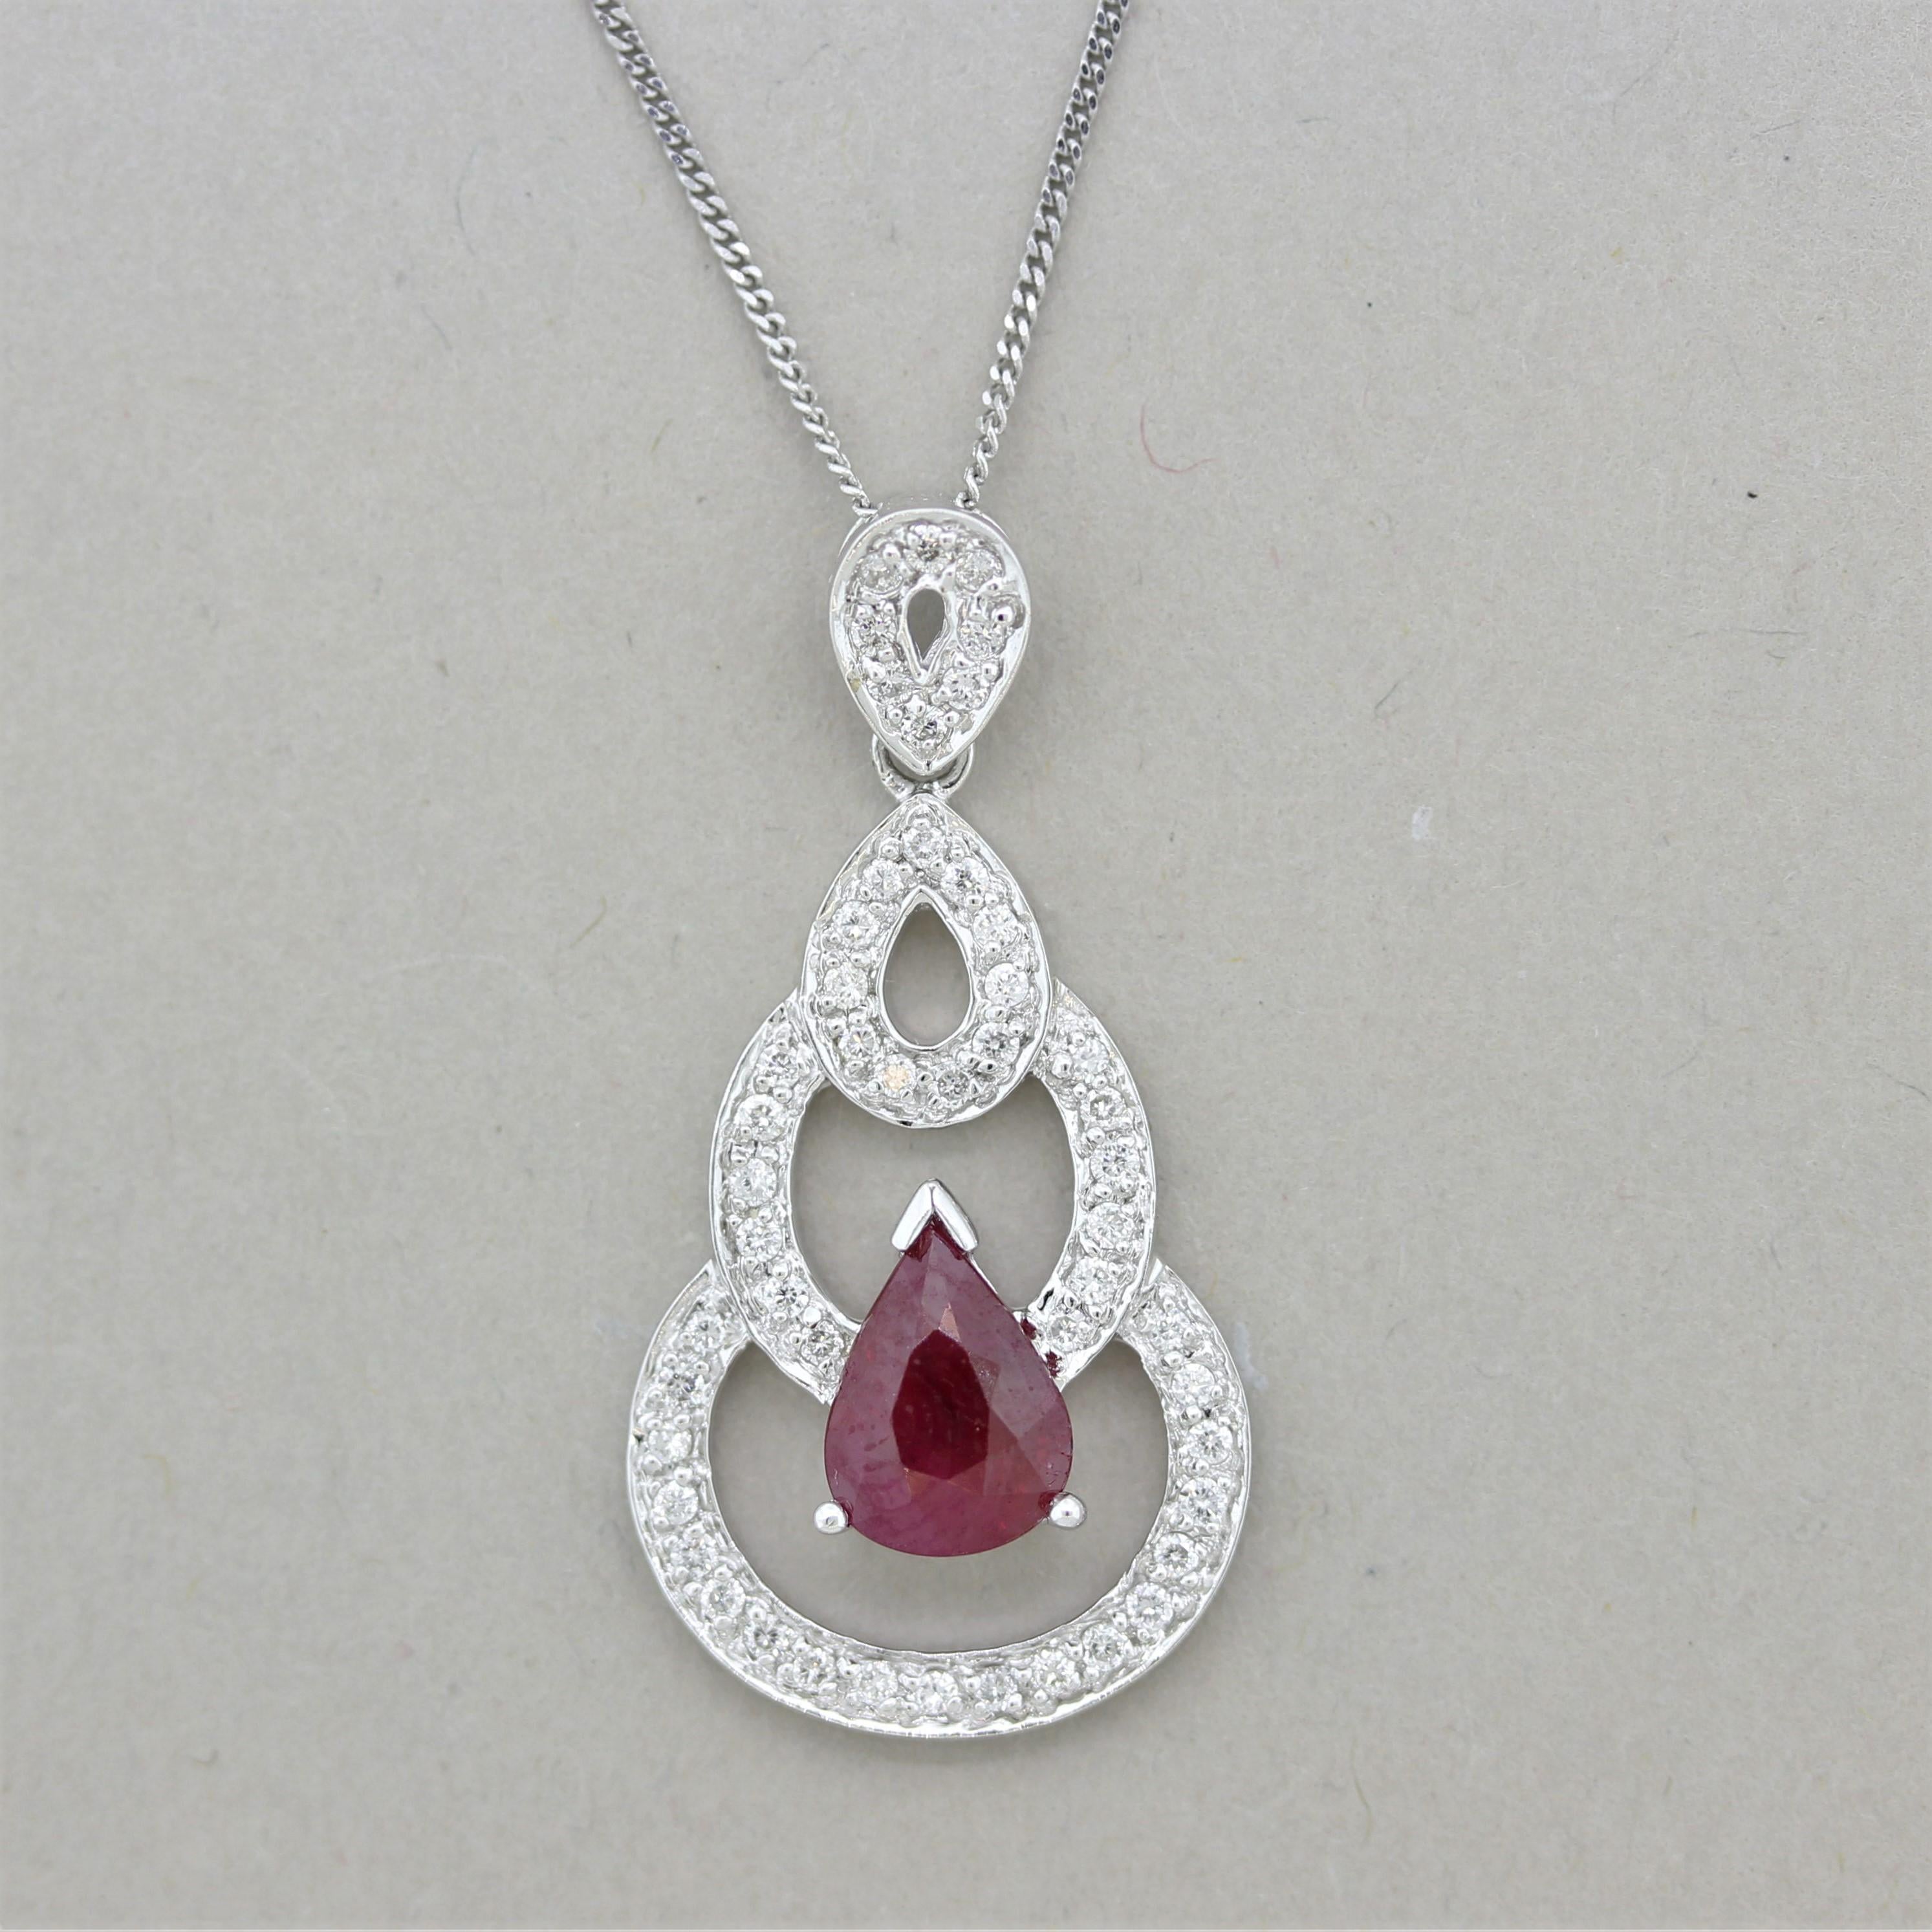 A fine pendant featuring a 1.18 carat pear-shape ruby! It has a rich vivid red color and is shaped beautifully in terms of the stones proportions and cut. It is accented by 0.29 carats of round brilliant-cut diamonds which add sparkle and brilliance